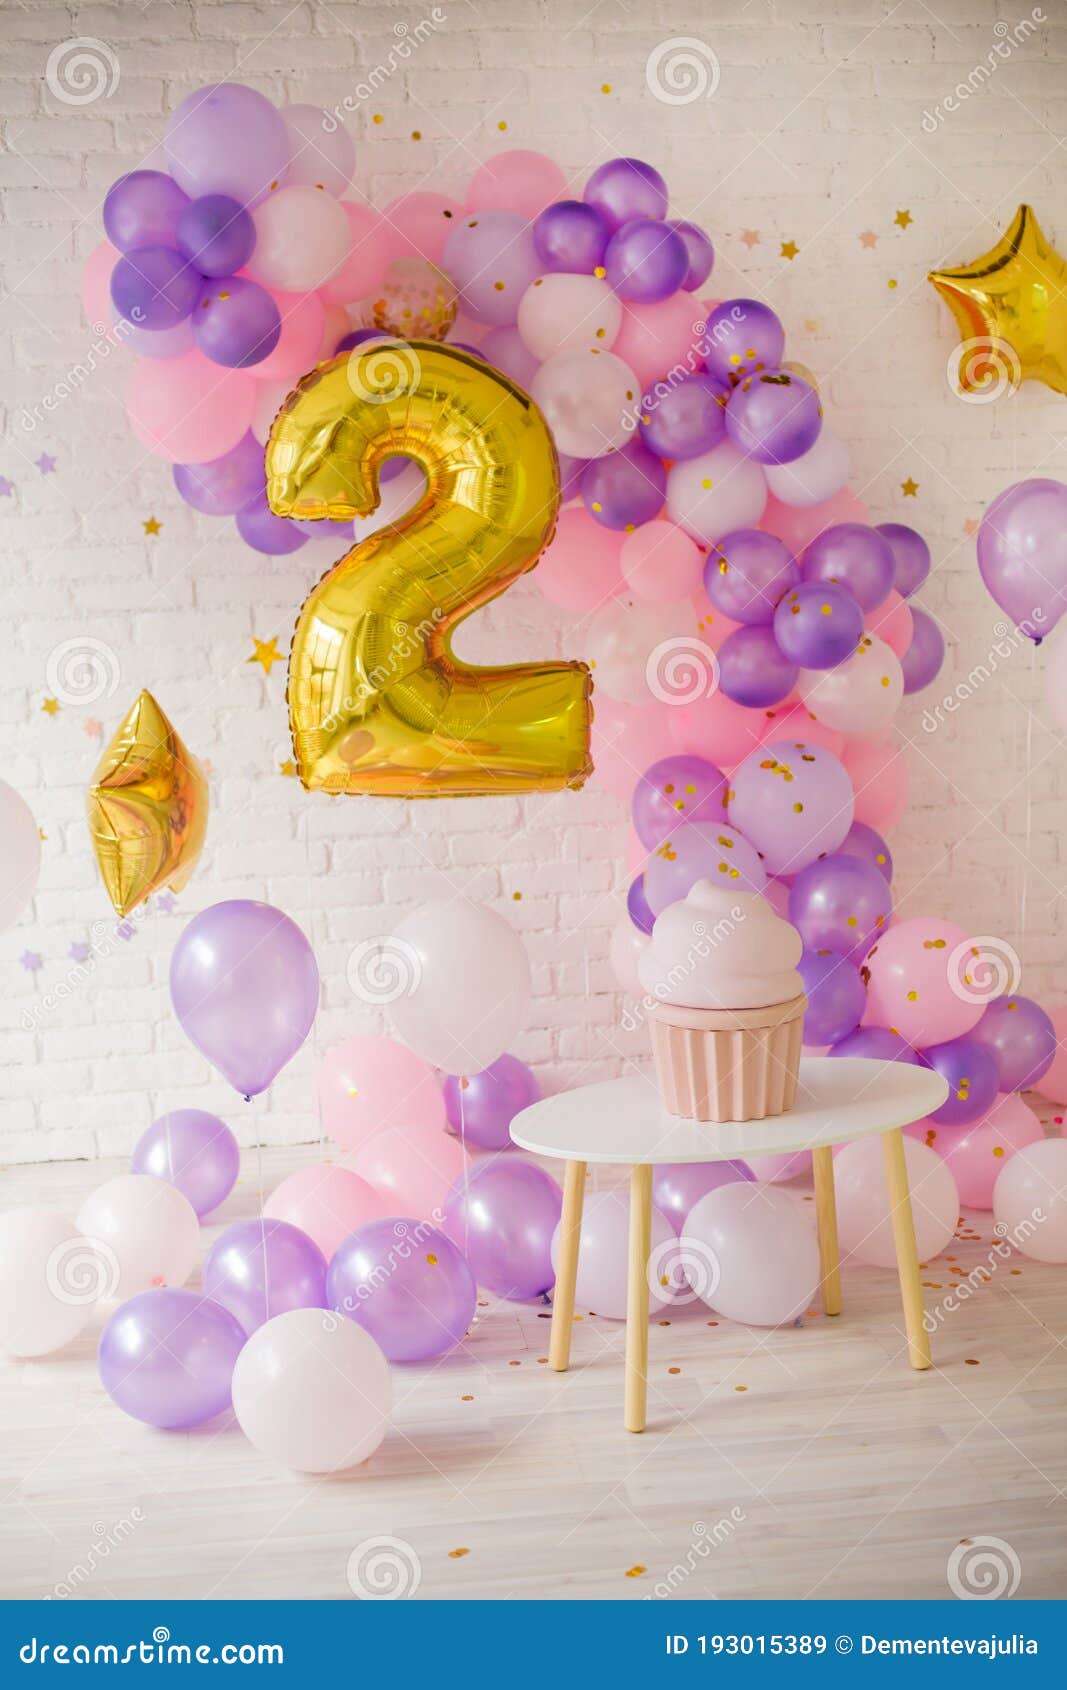 Balloons for Second Birthday for Girl Stock Image - Image of dessert,  color: 193015389